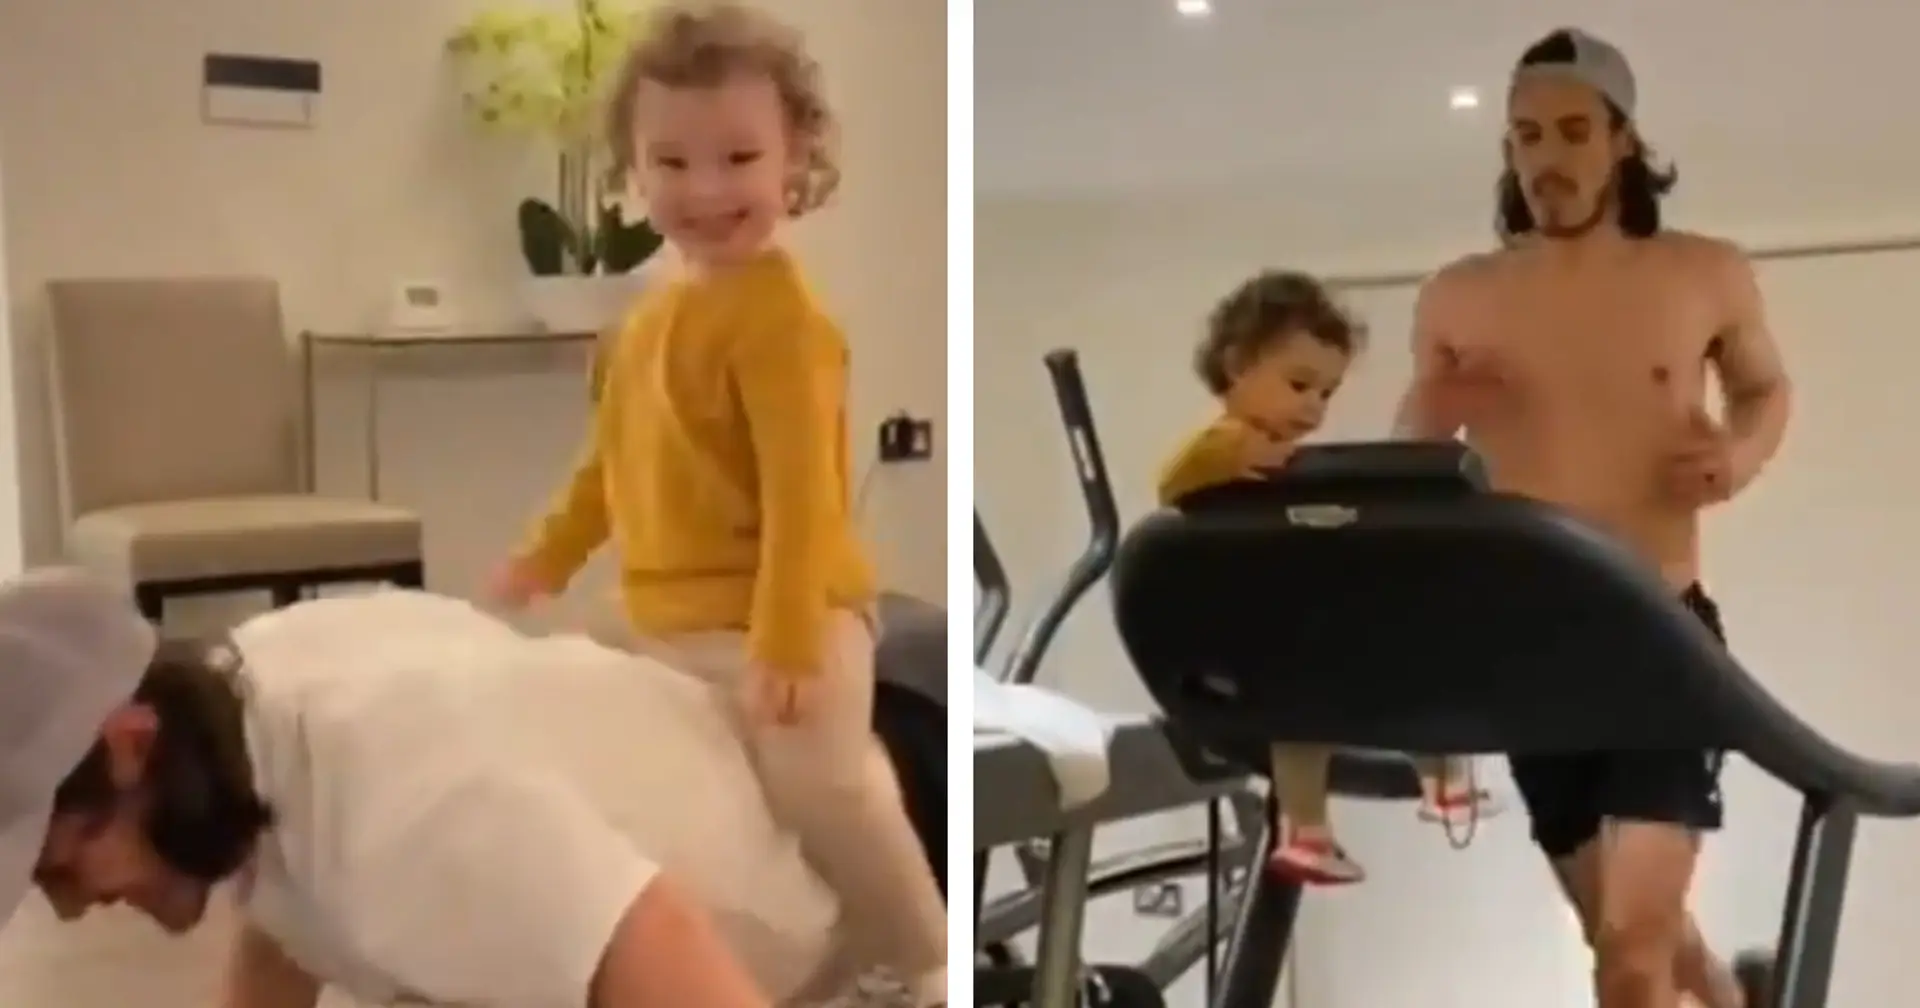 Daddy's little helper: Edinson Cavani shares adorable home workout video with his daughter 